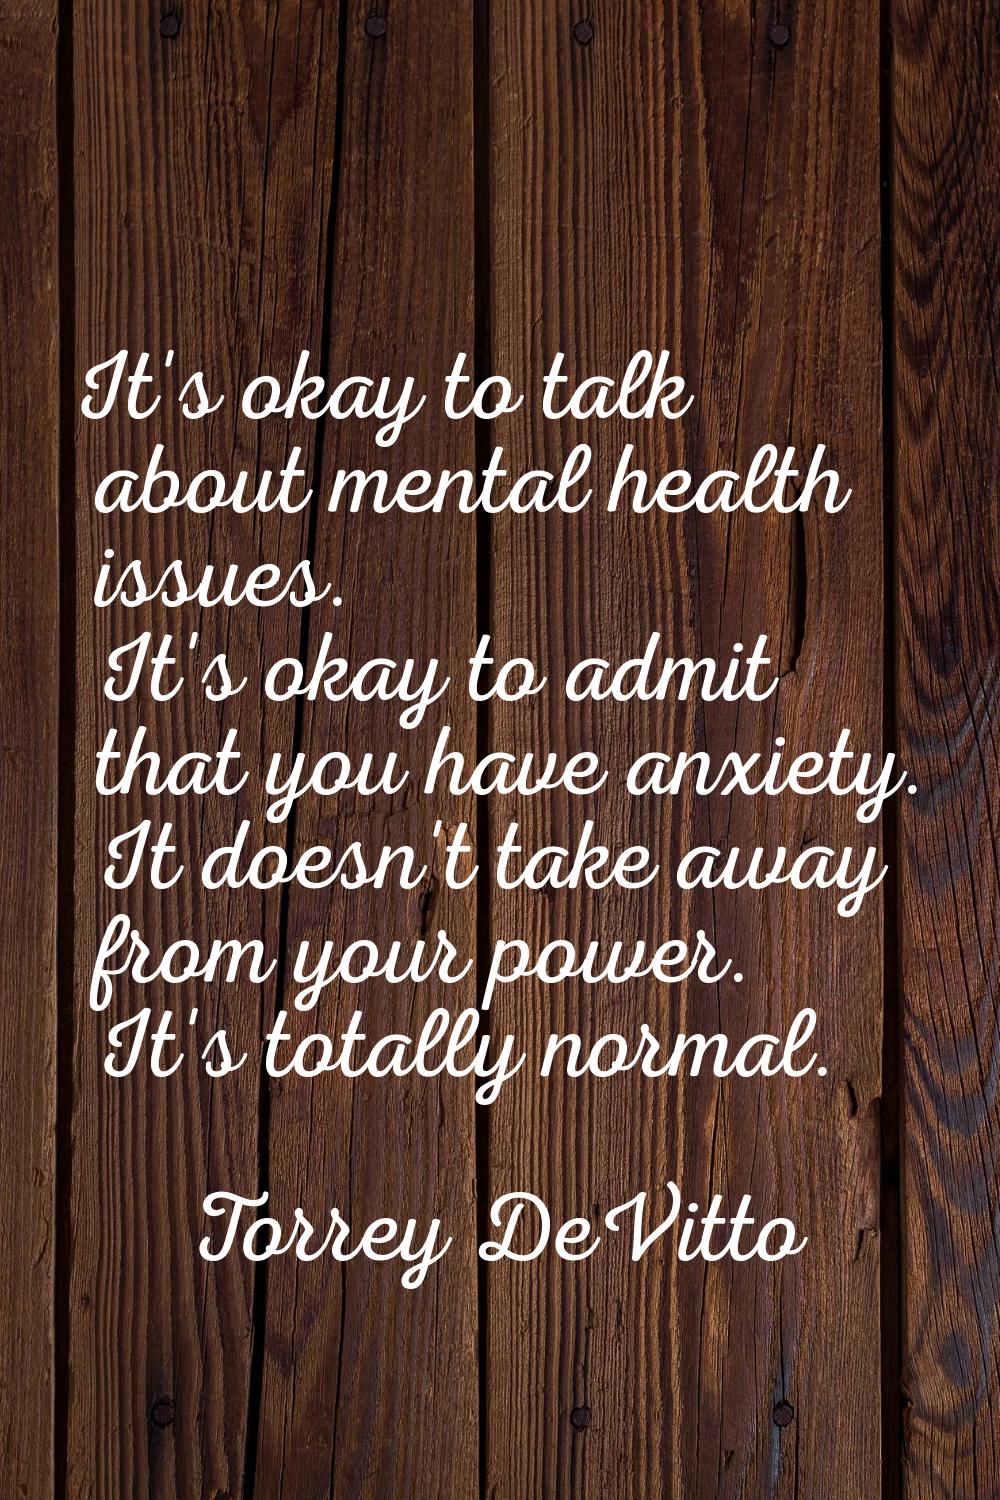 It's okay to talk about mental health issues. It's okay to admit that you have anxiety. It doesn't 